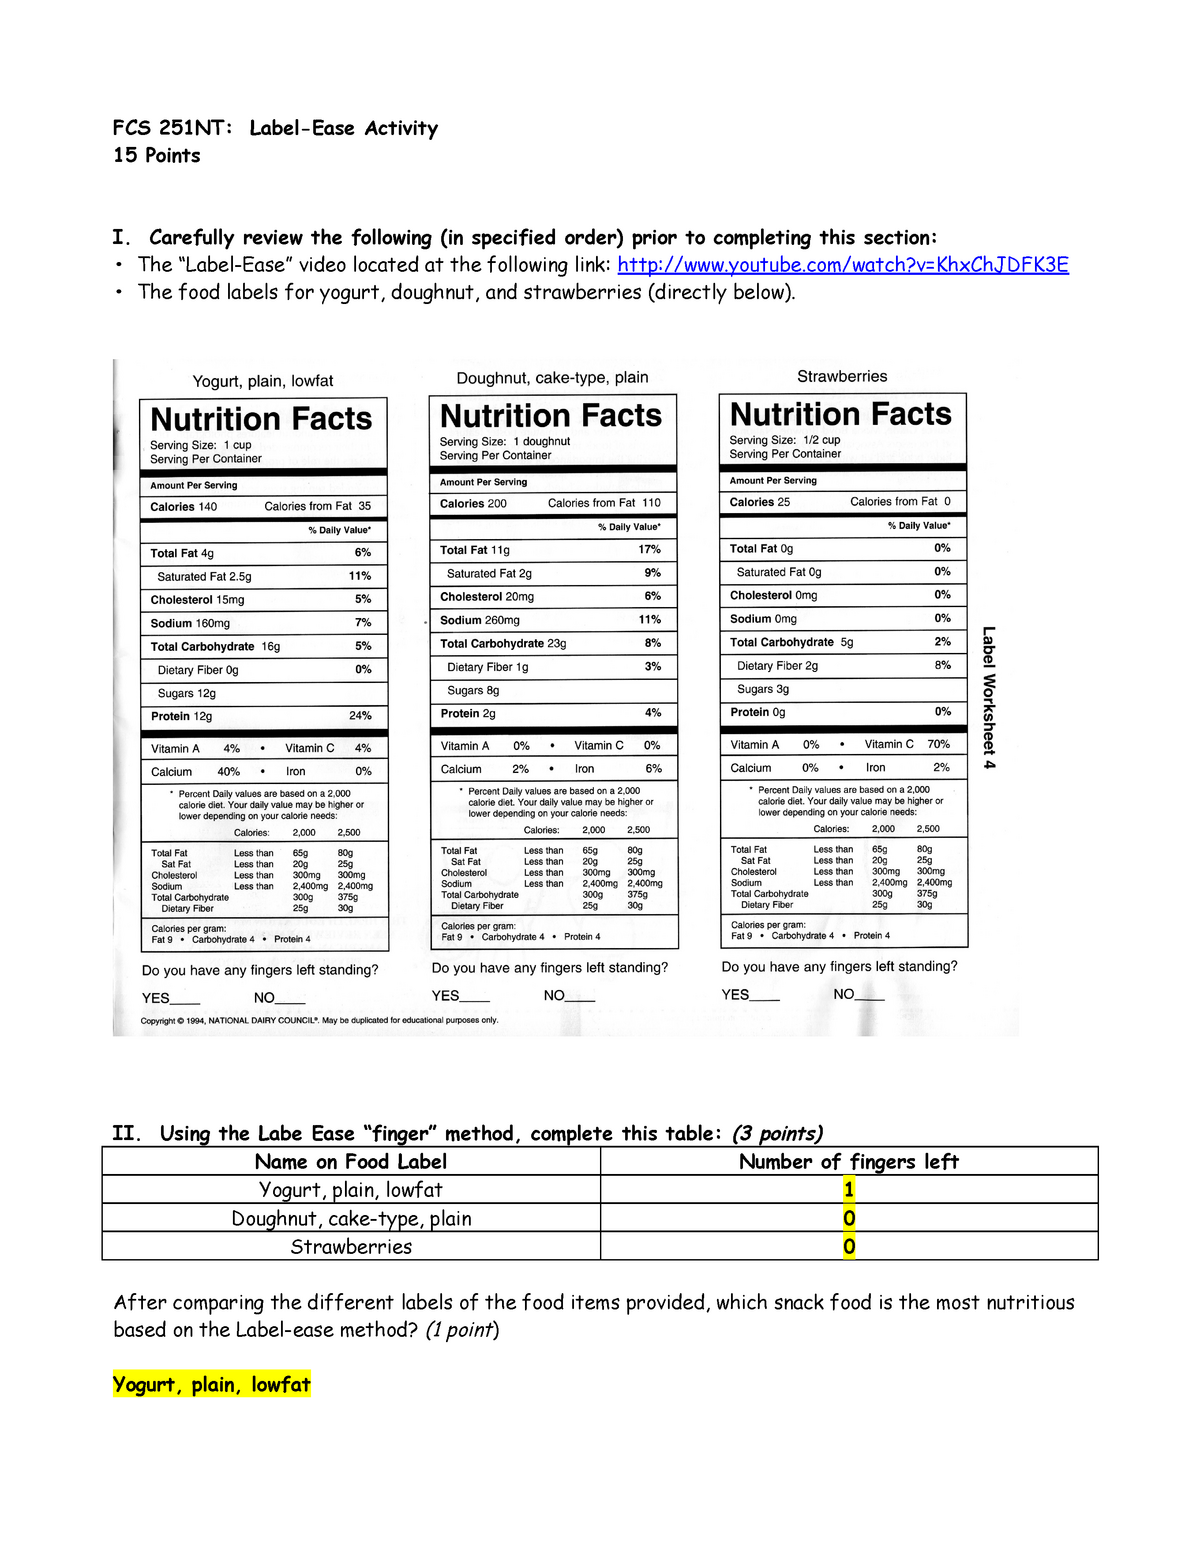 food label calculations assignment